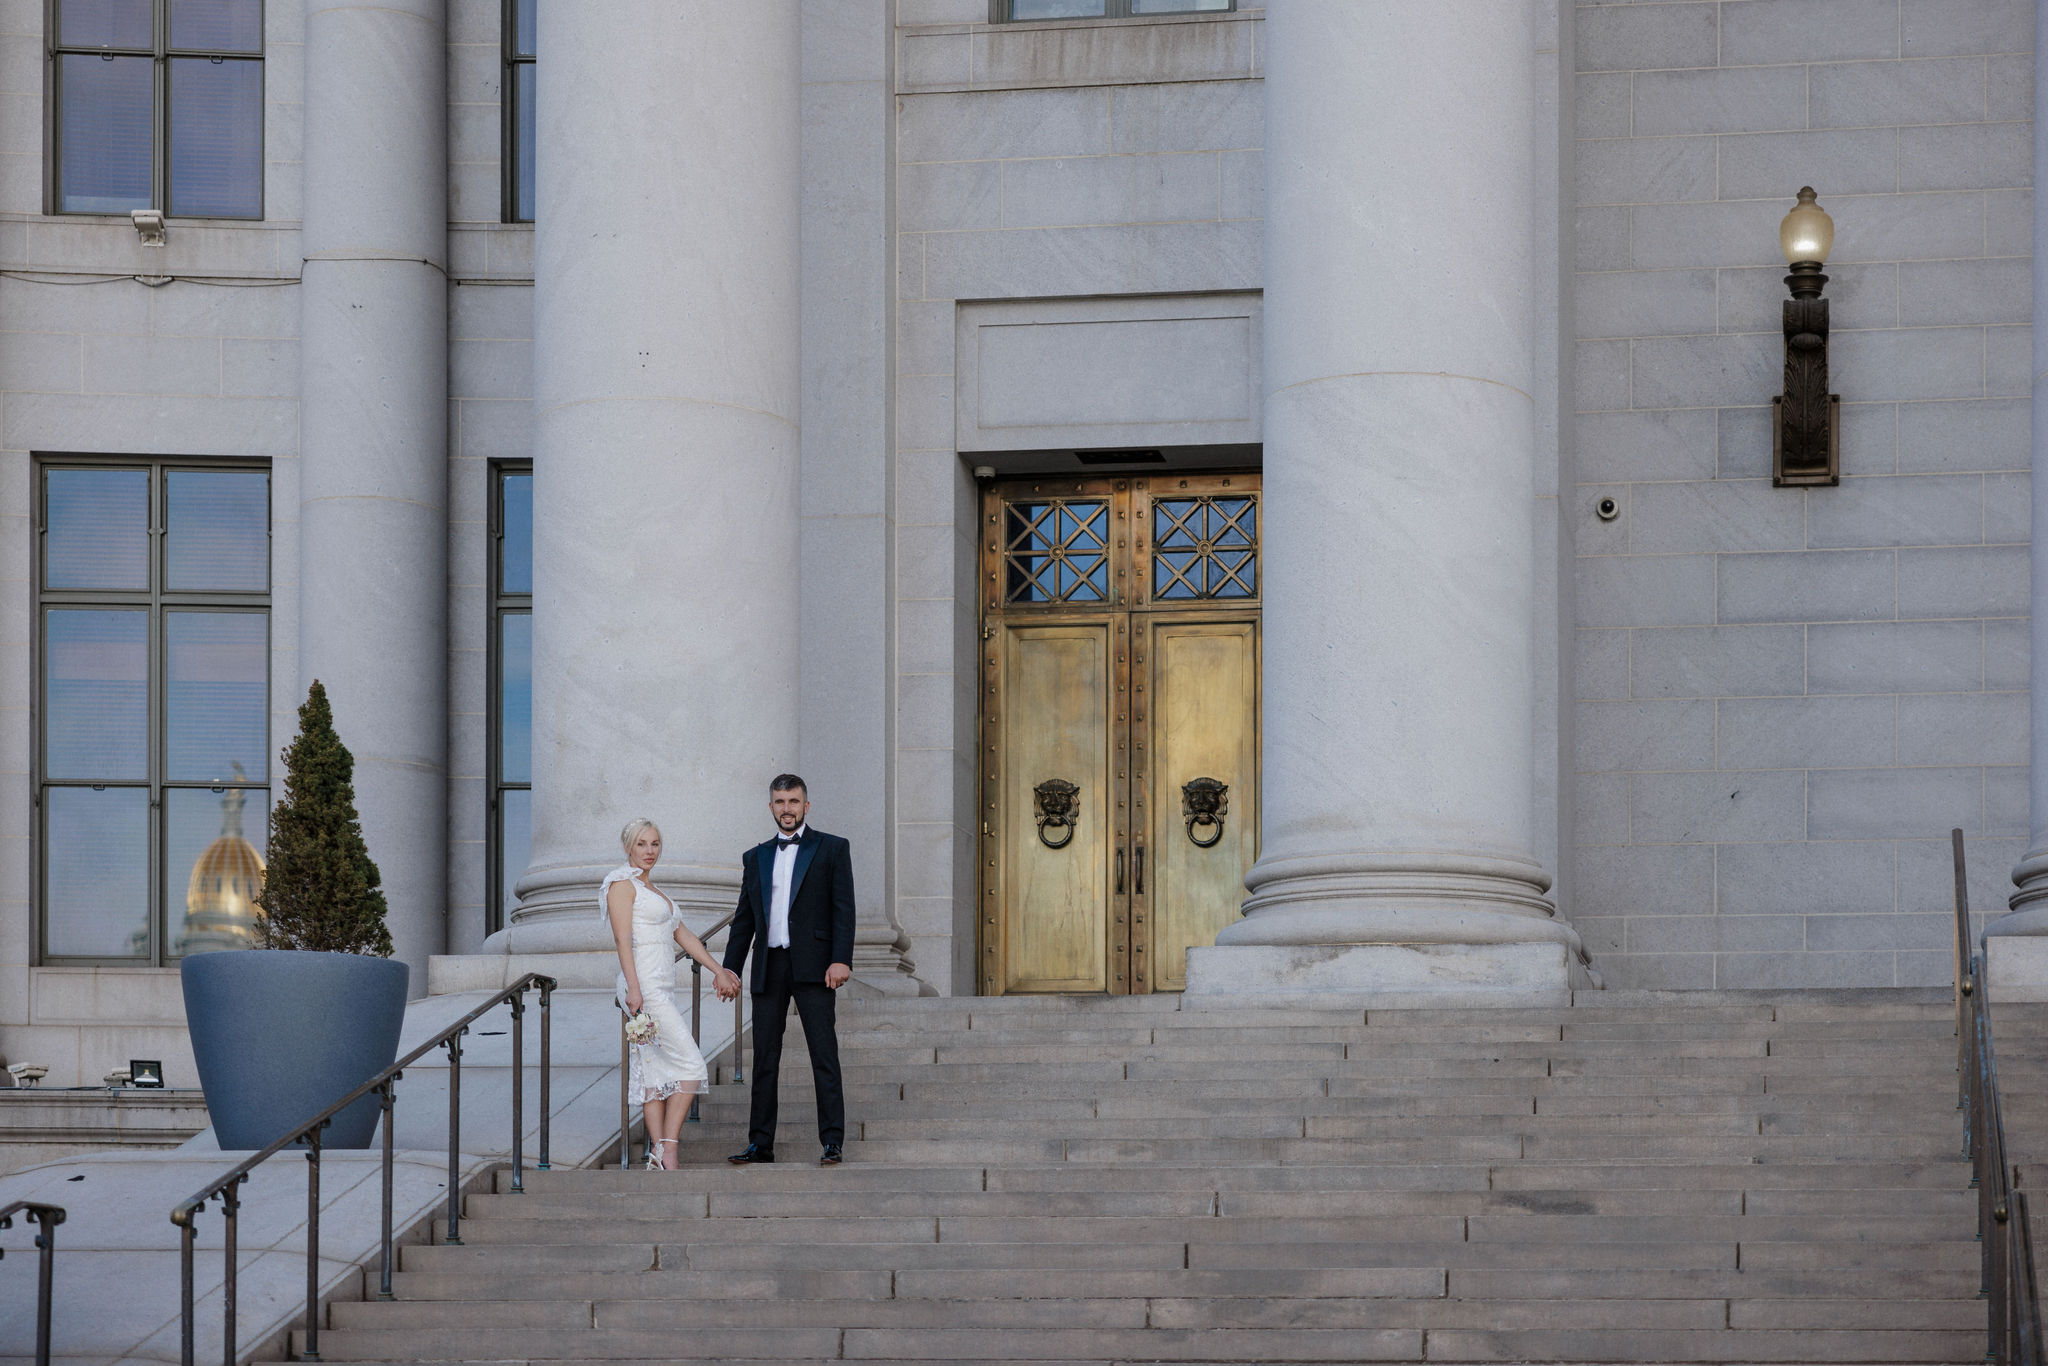 bride and groom stand on courthouse steps during denver elopement.